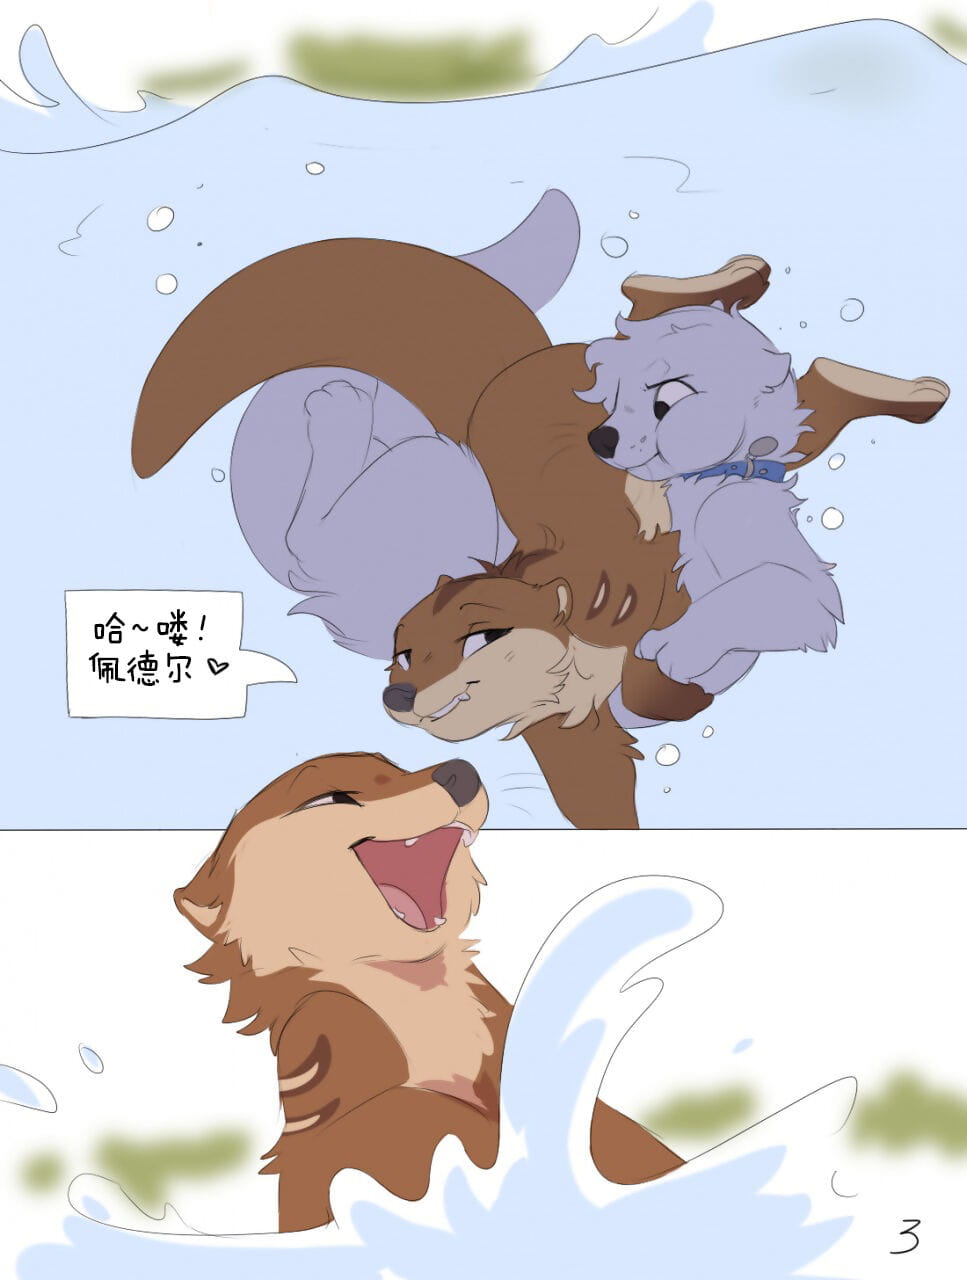 personale lontra spazio 水獭的私人空间 page 1